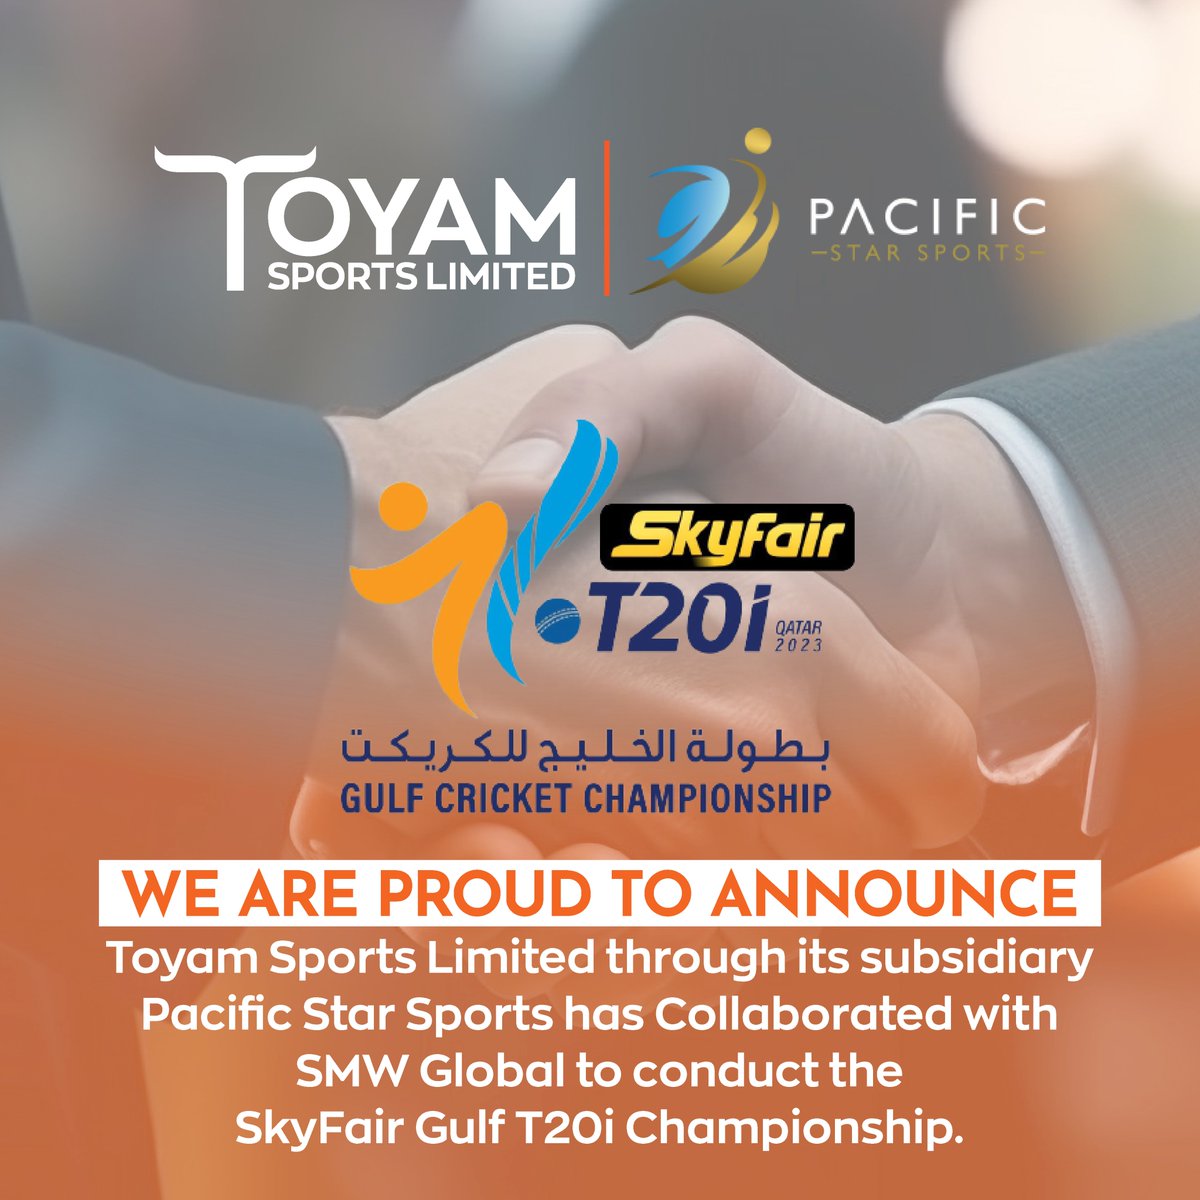 We are proud to announce #ToyamSportsLimited through its subsidiary #PacificStarSports has collaborated with SMW Global to conduct the SkyFair Gulf T20i Championship. bseindia.com/xml-data/corpf…